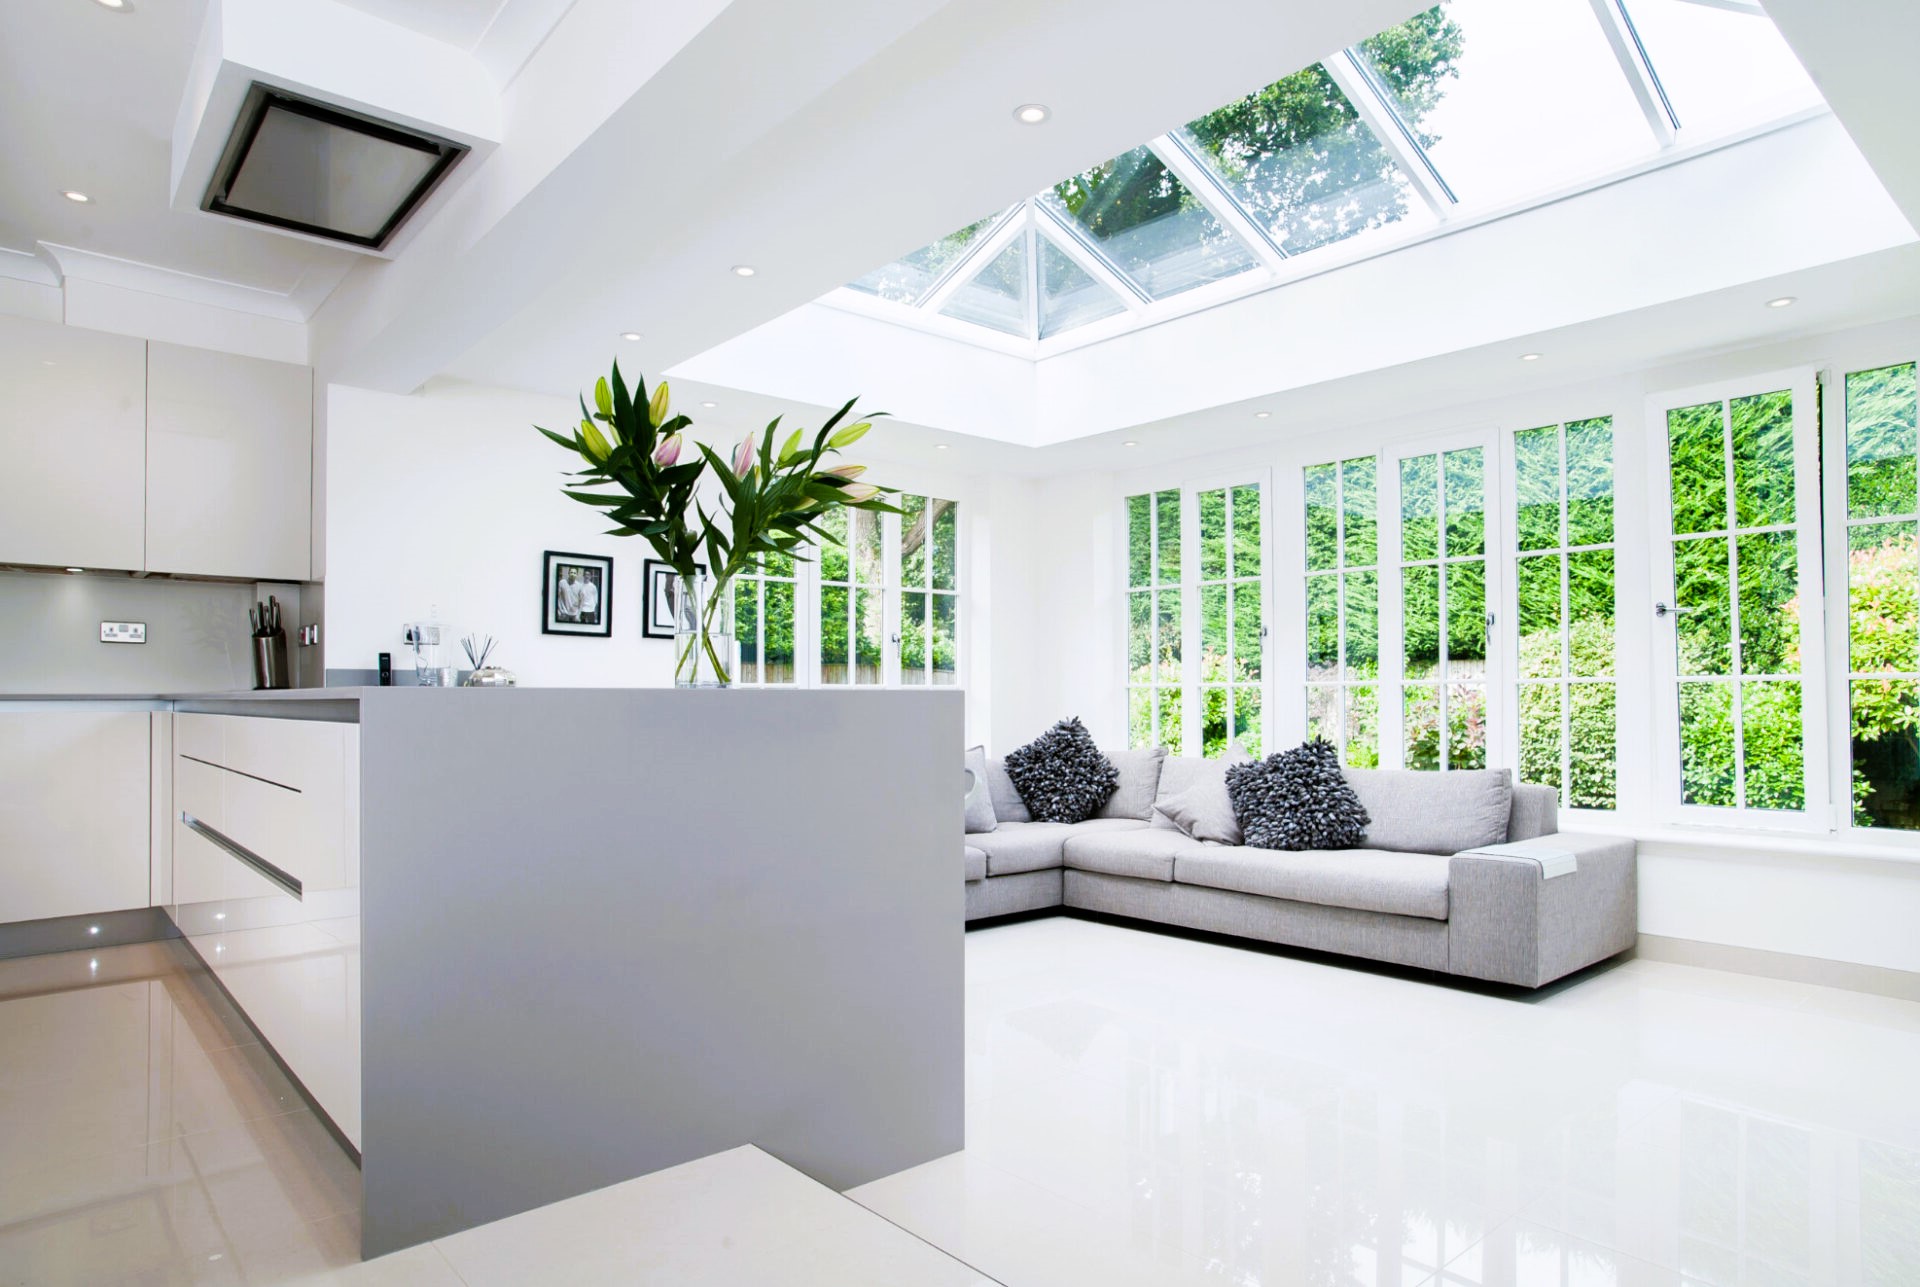 Skylights: Inviting Natural Light into Your Home’s Interior